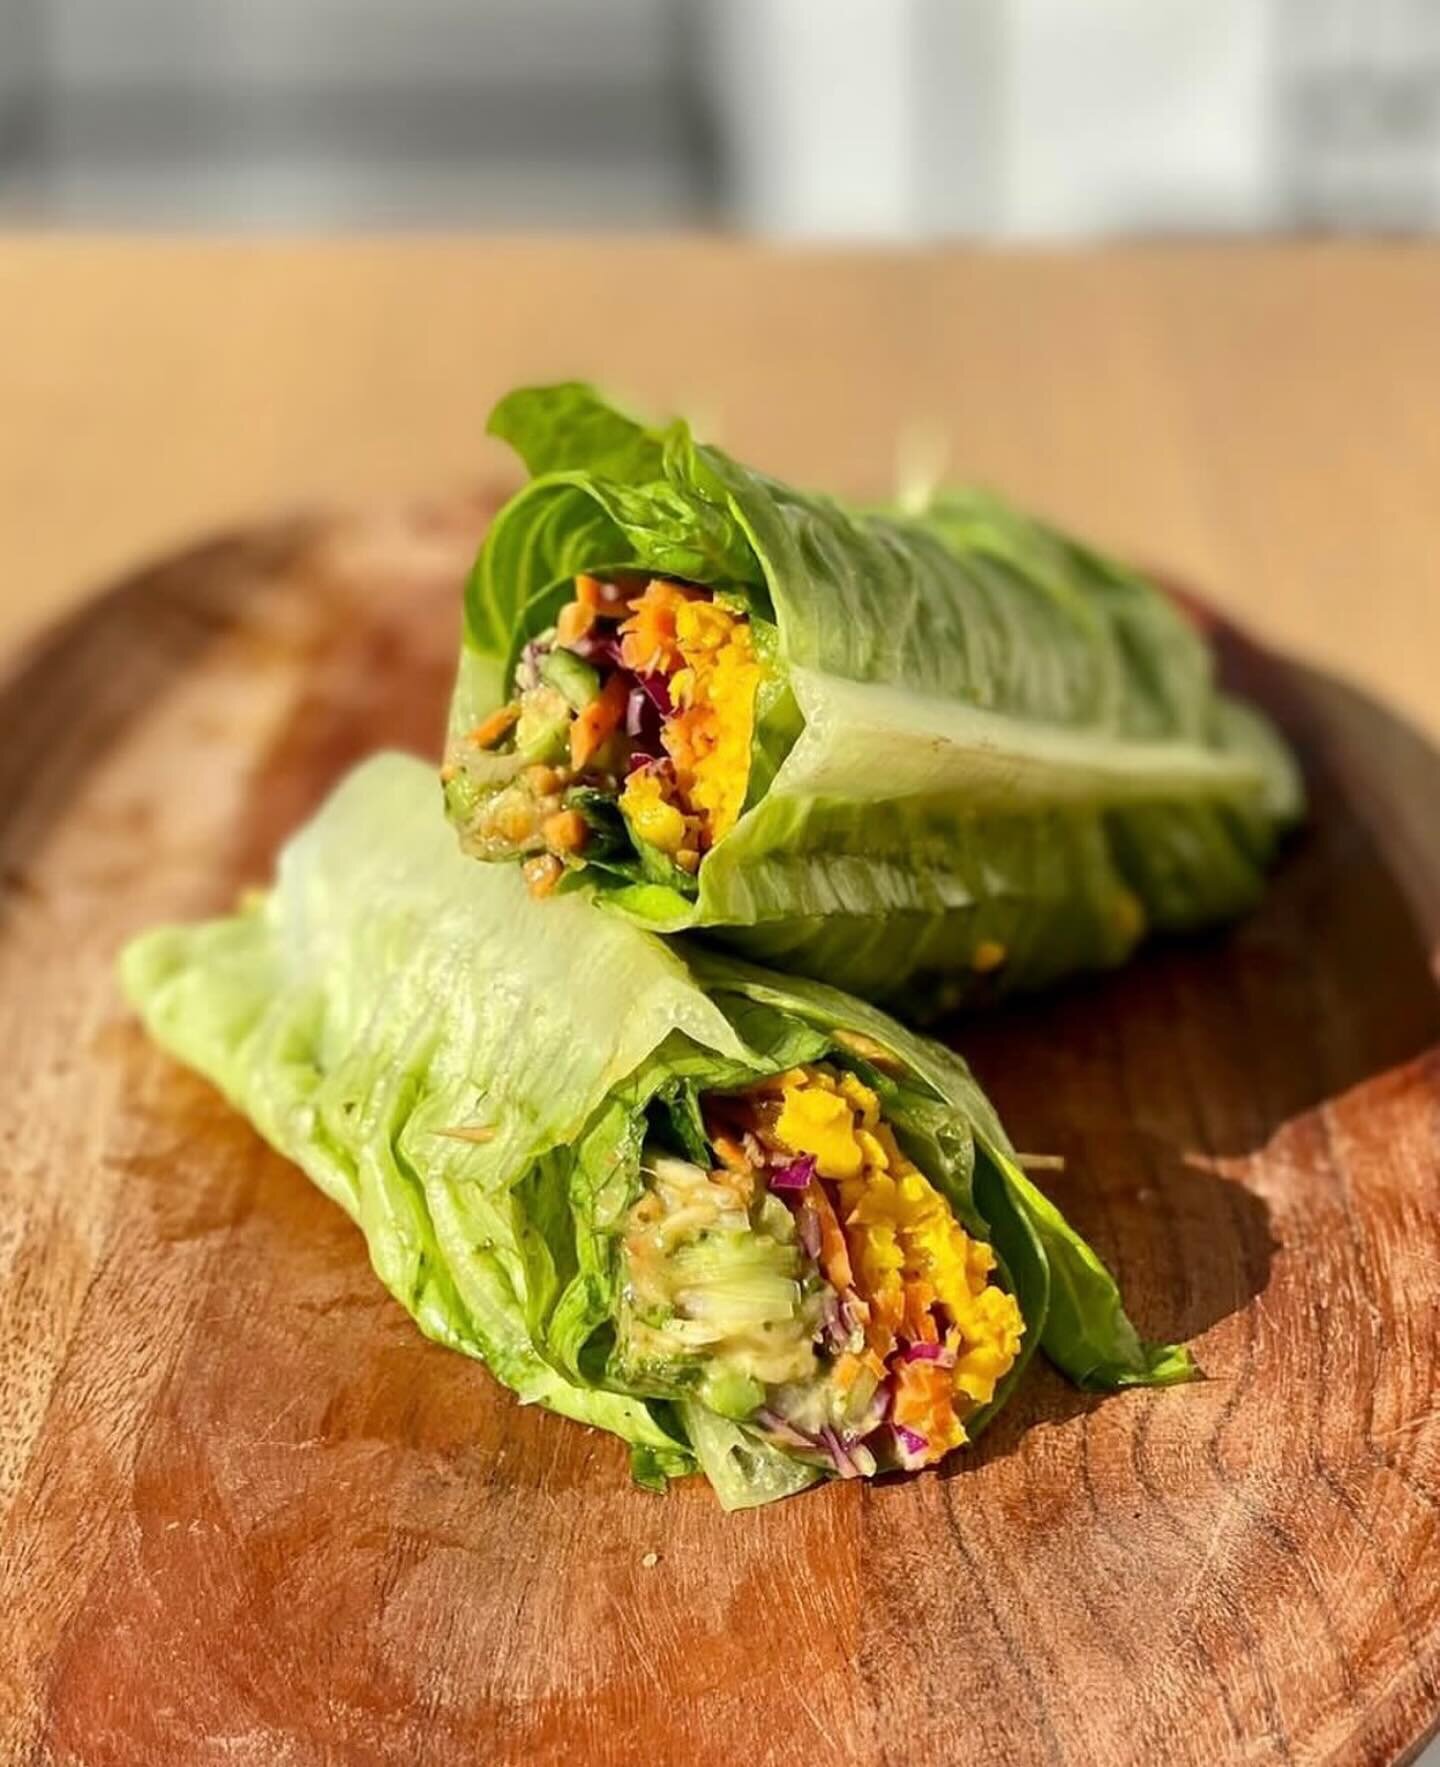 Swipe to see our Lent-friendly options 🥬 Find them @meatthefish and on @toters_delivery 

1. Veggie wrap
2. Rebel Caesar 
3. Falafel wrap 
4. Take me to Bali 
5. Nutty Bachelor

#zulu#zulubeirut